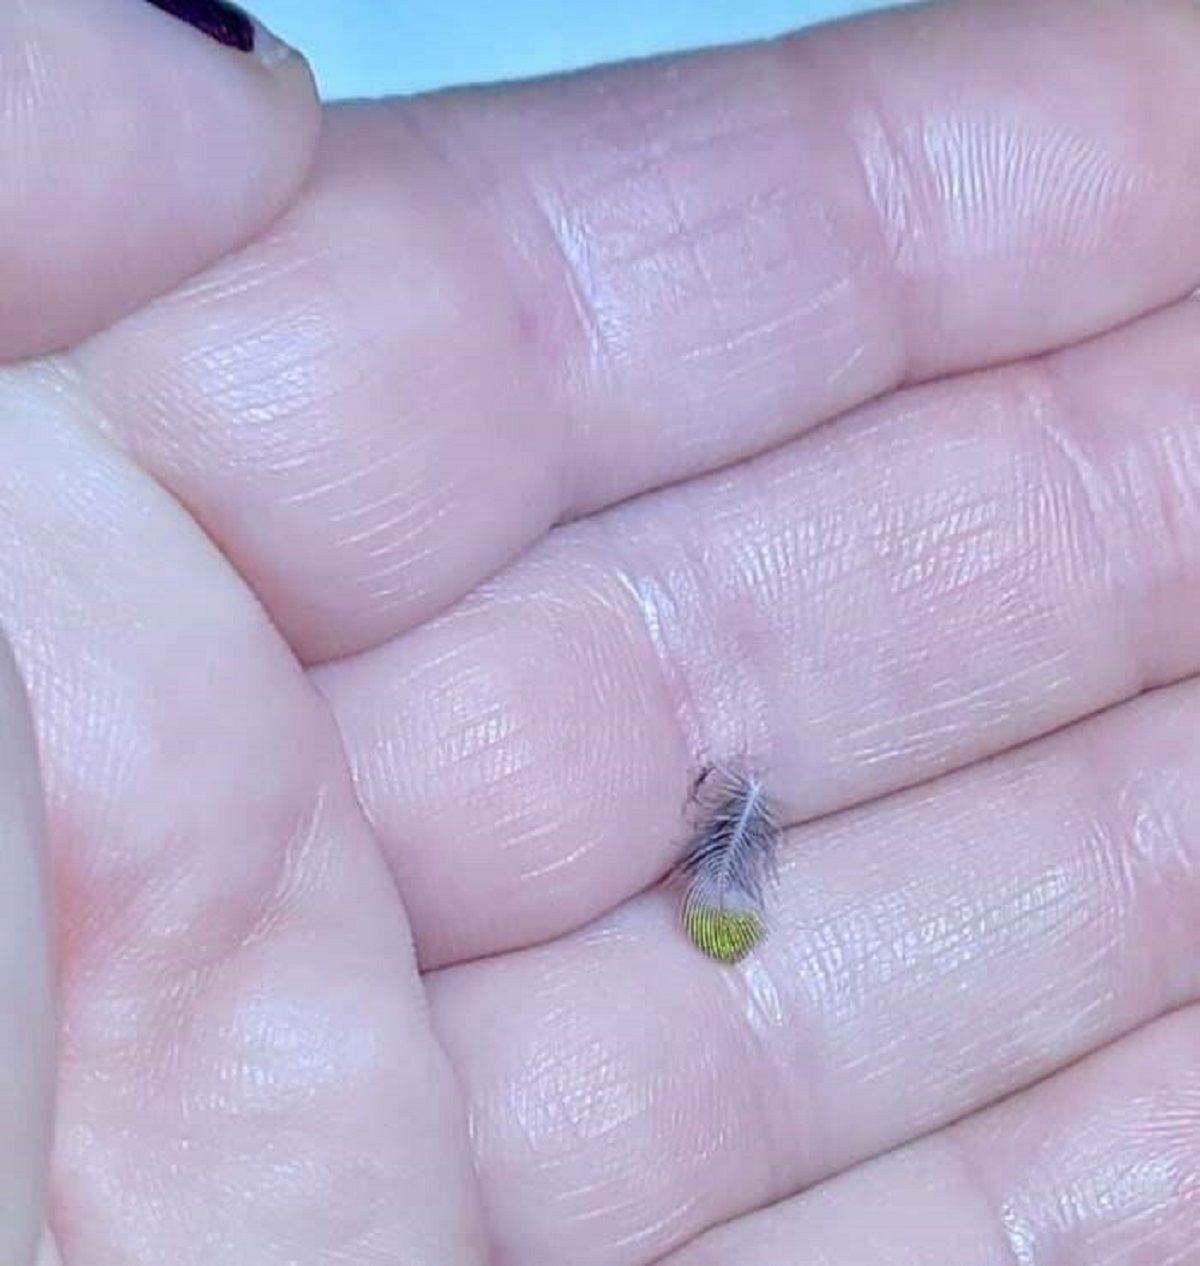 This is how incredibly small a hummingbird feather is: